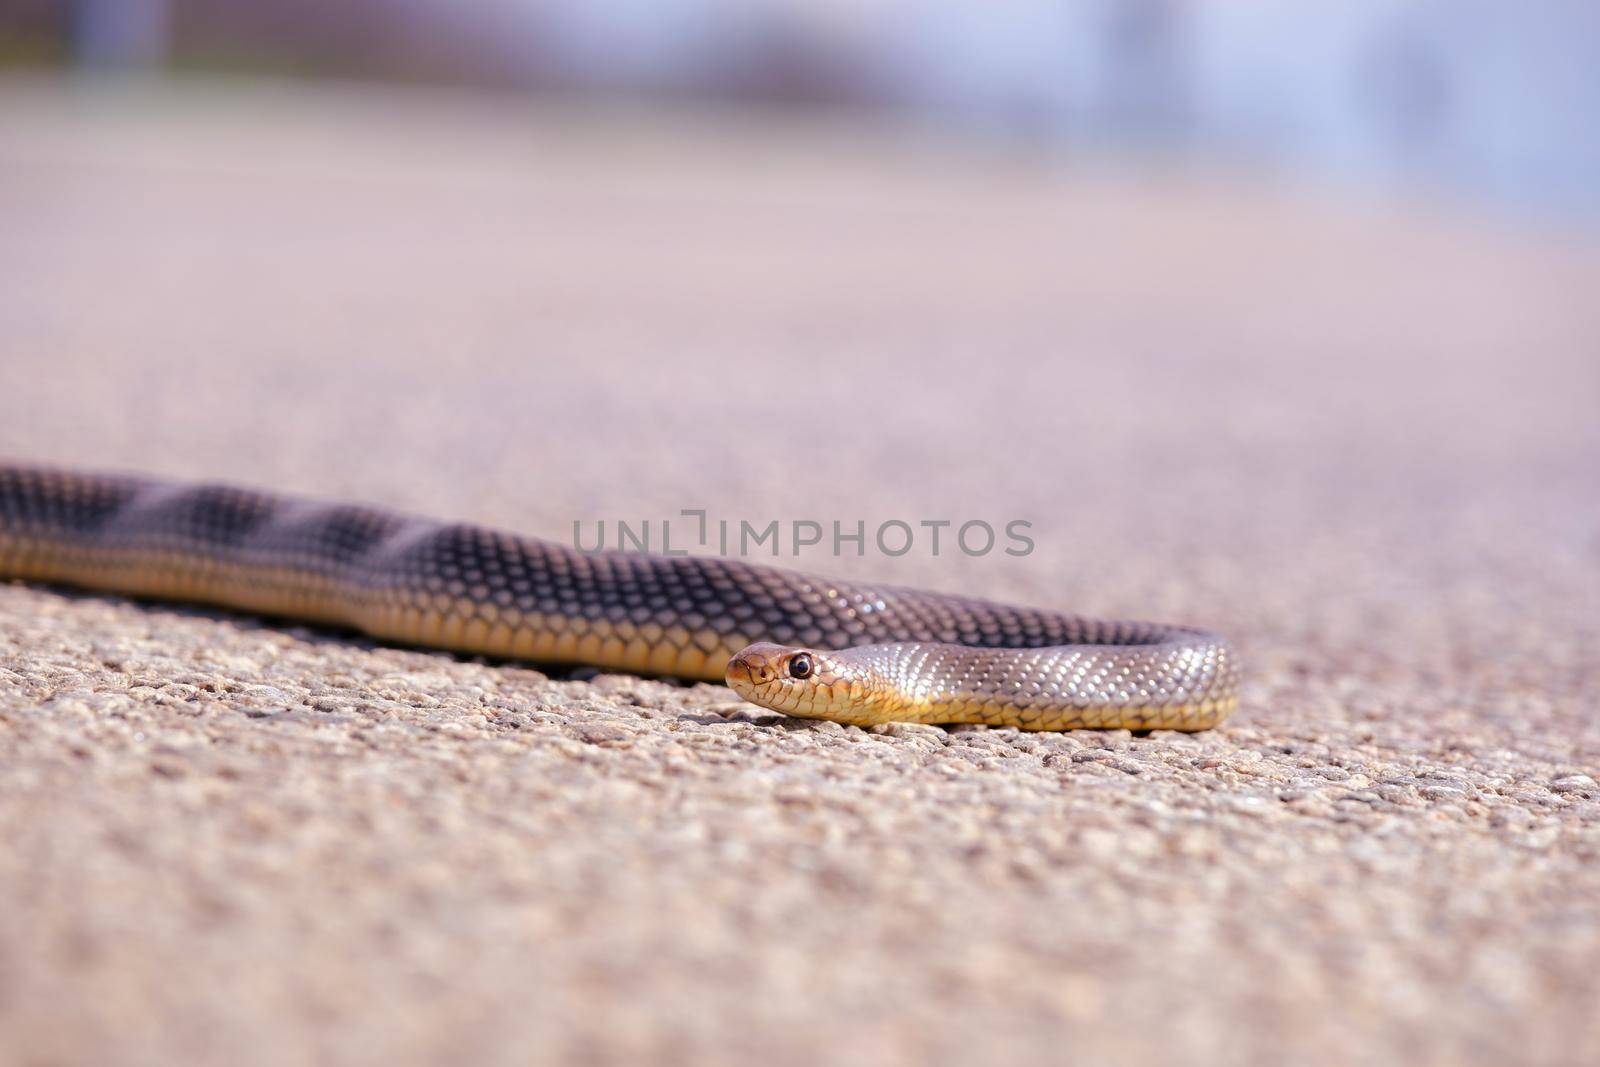 Brown snake crossing dirt road. Snake on the road. download photo